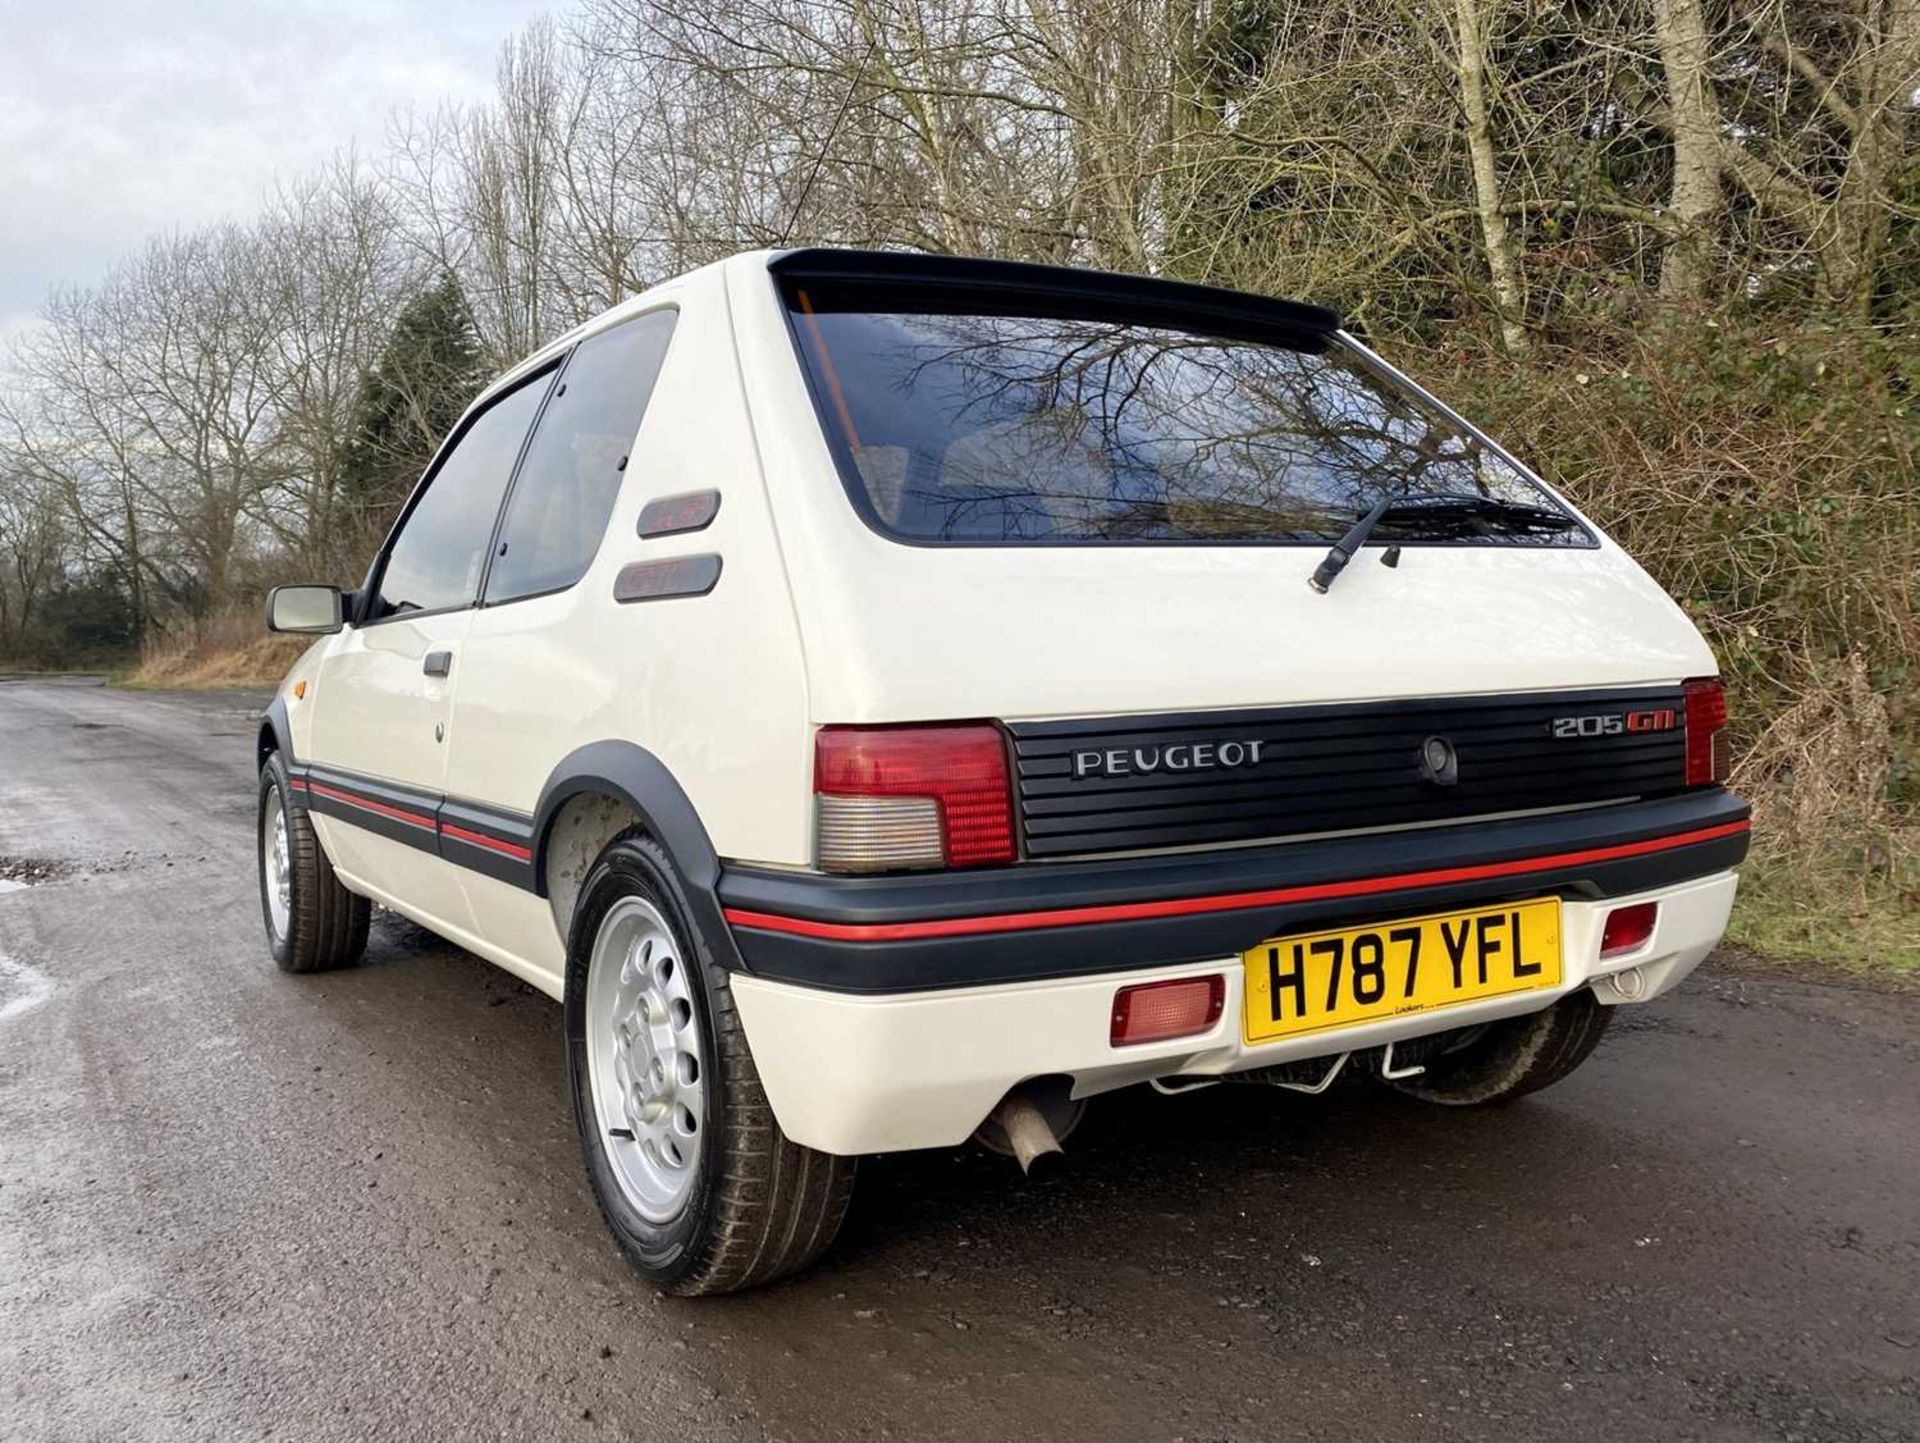 1990 Peugeot 205 GTi 1.6 Only 56,000 miles, same owner for 16 years - Image 24 of 81